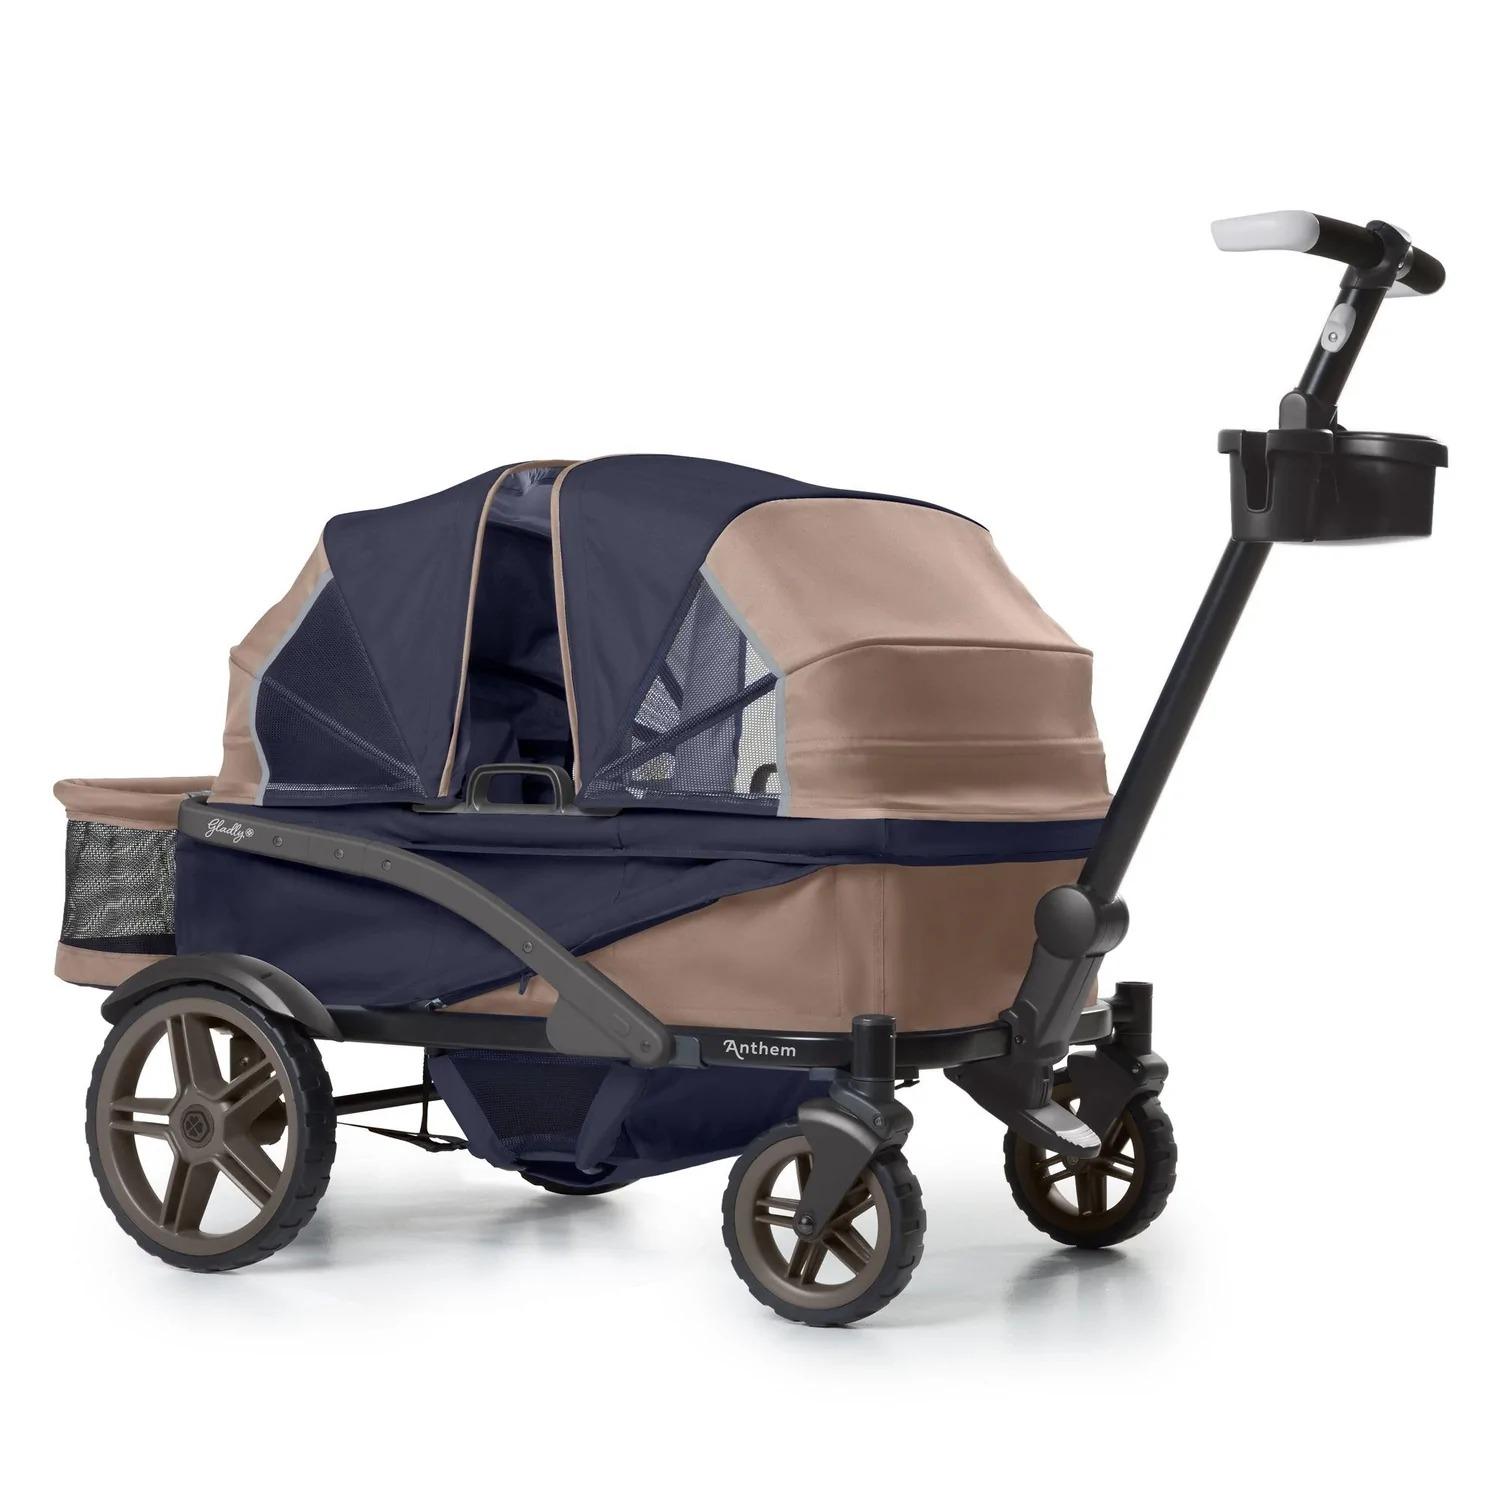 When it comes to uneven terrain, sandy beaches, or rocky mountain trails, a regular stroller just won’t cut it! Thankfully there is a solution that will survive any environment, while also providing extra storage space and convenience. Cue the Wagon Stroller! a0d5b0bf anthem 4